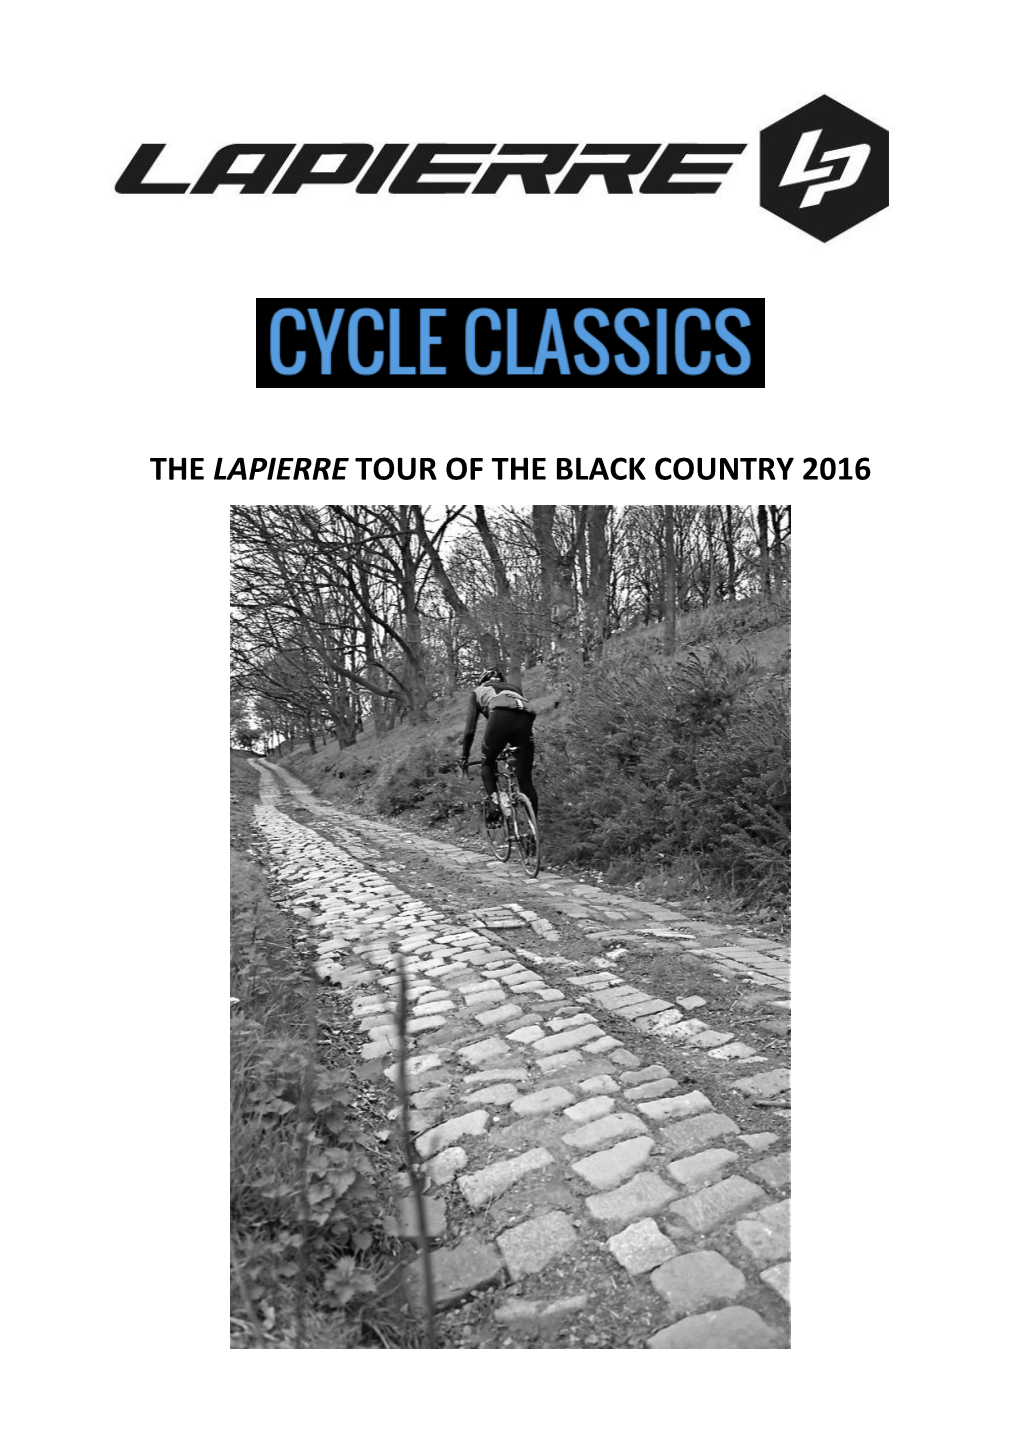 The Lapierre Tour of the Black Country 2016